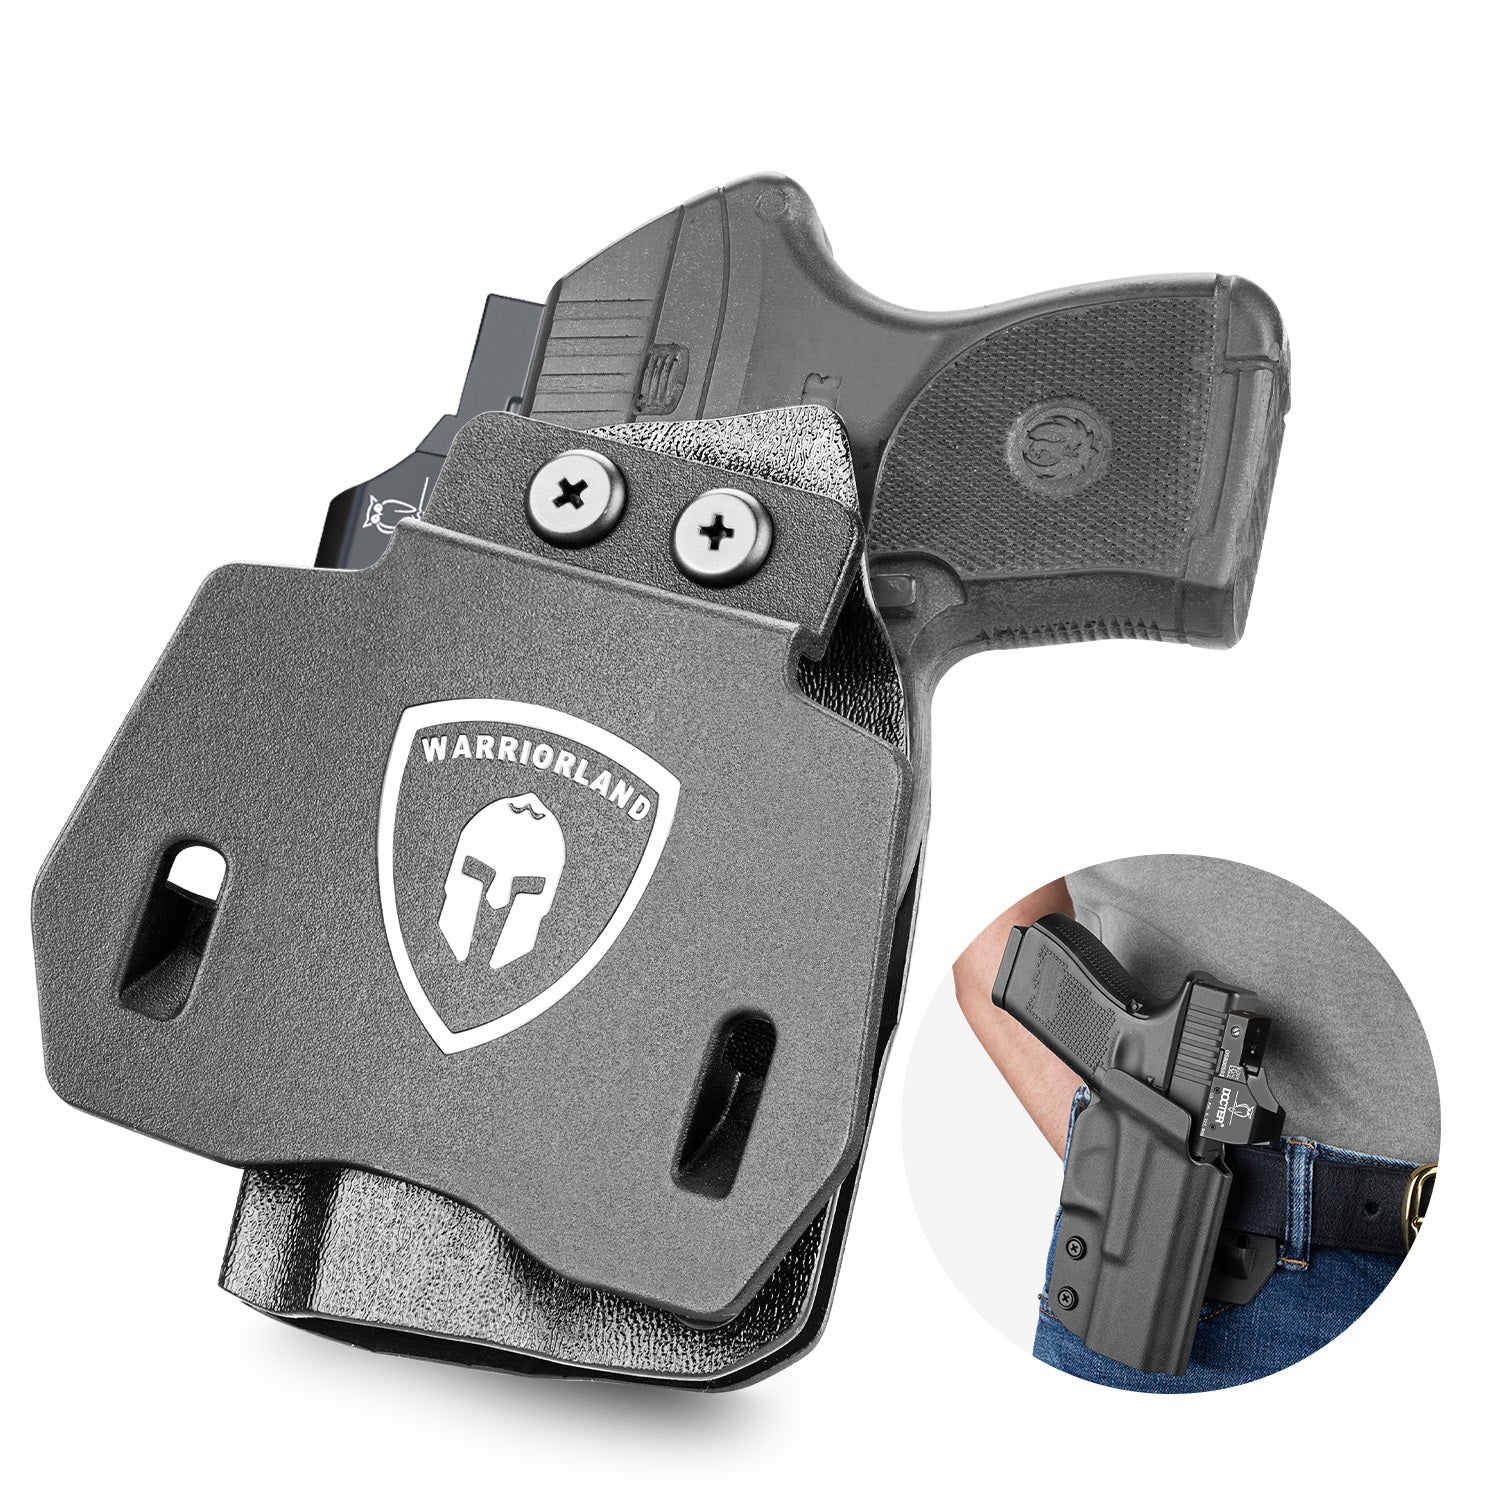 OWB Holster Optics Cut Fit Ruger LCP Max Pistol, Outside Waistband Open Carry Max .380 Holster with 1.75 Inch Paddle, Adj. Retention & Cant, Right Hand|WARRIORLAND